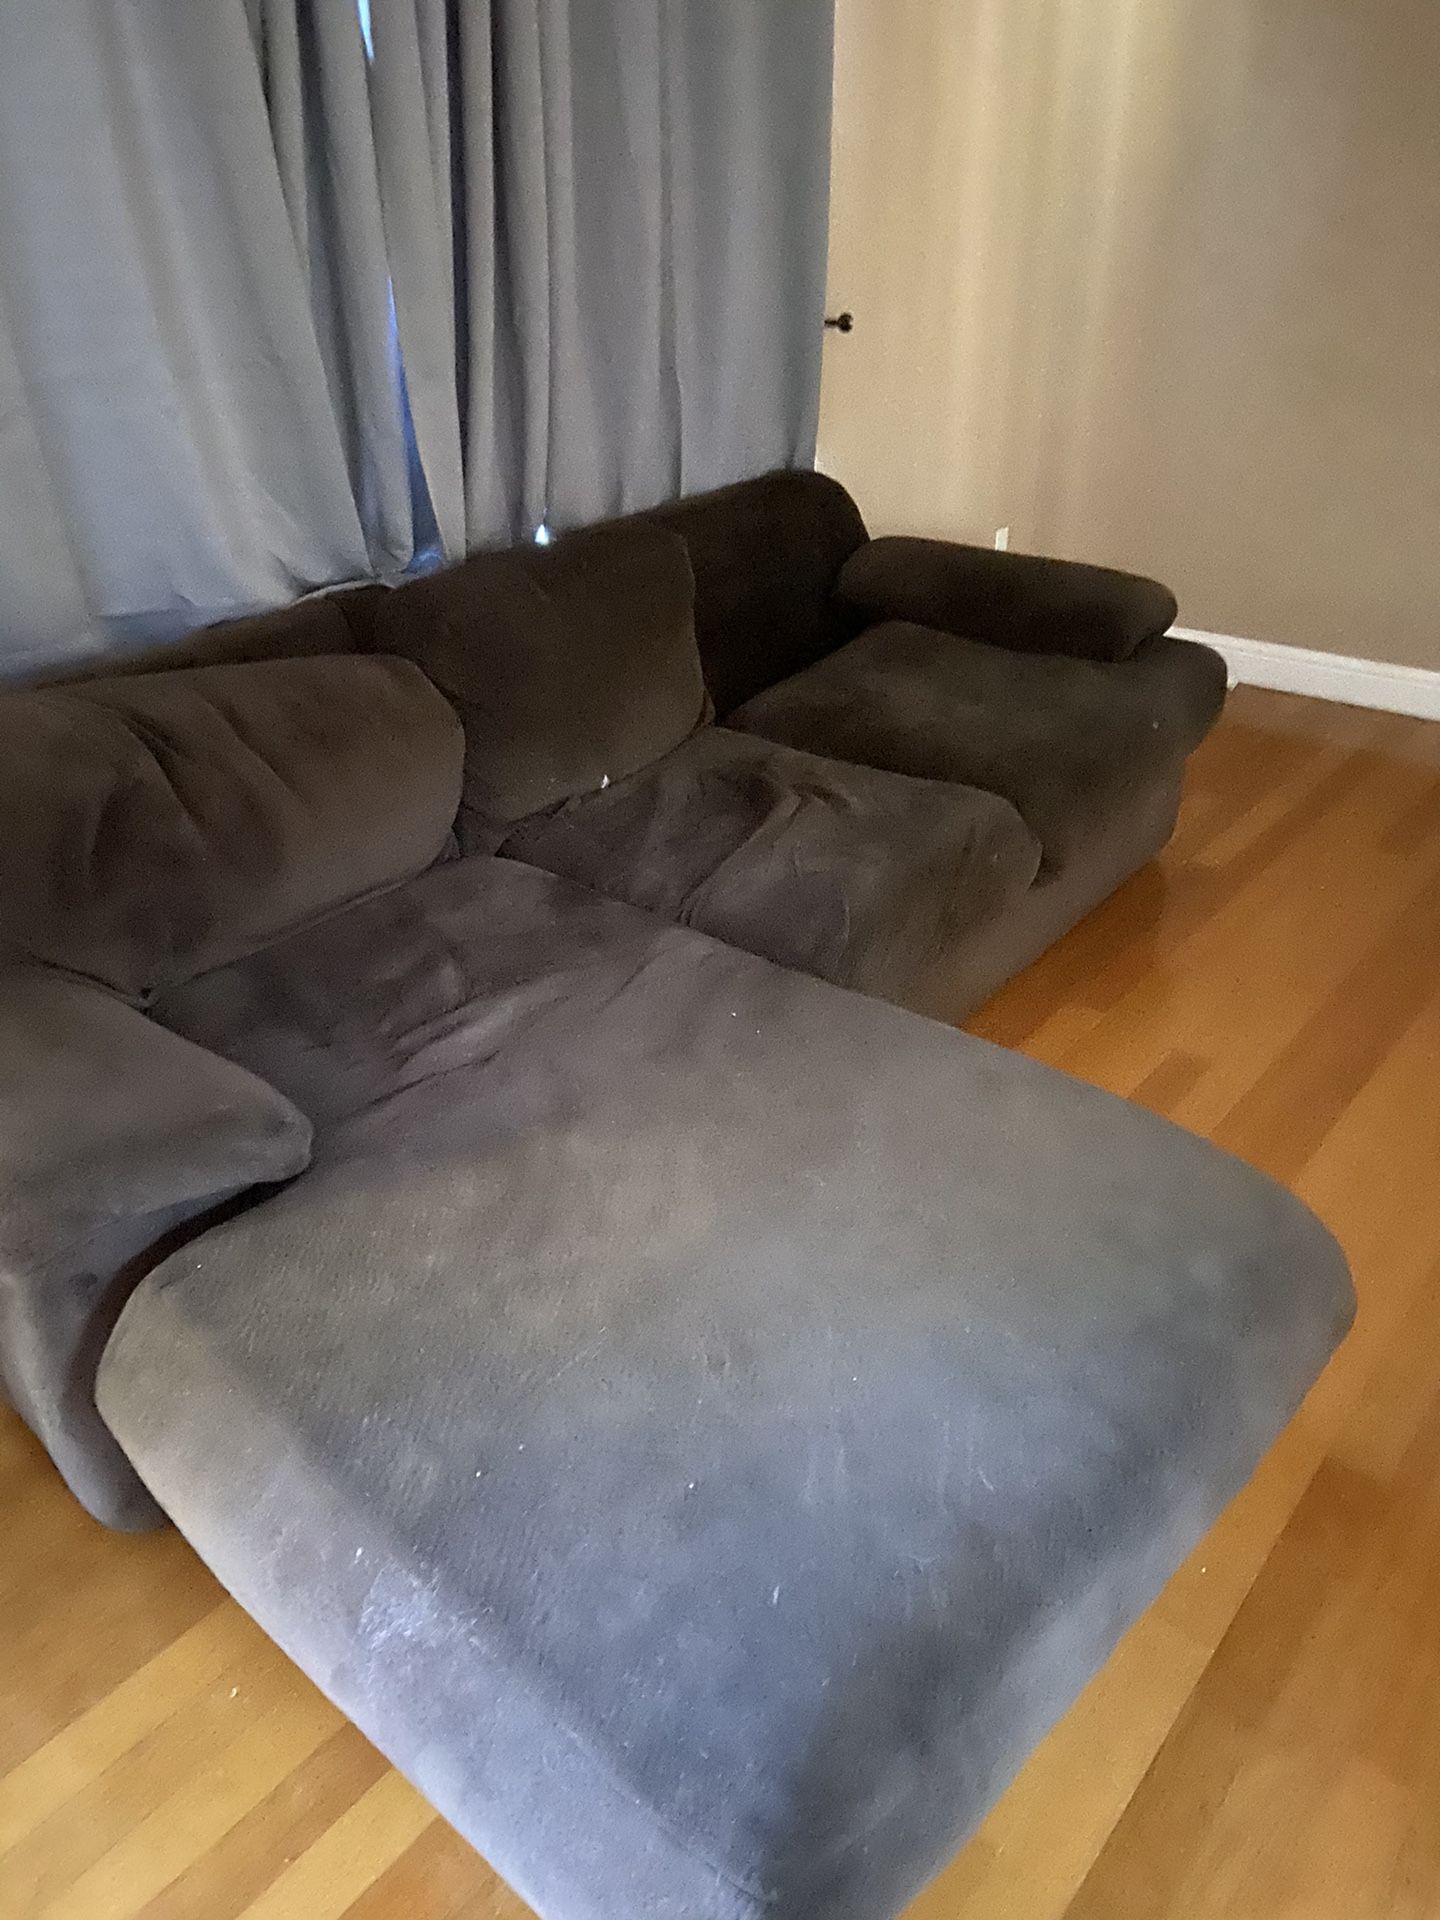 FREE Couch